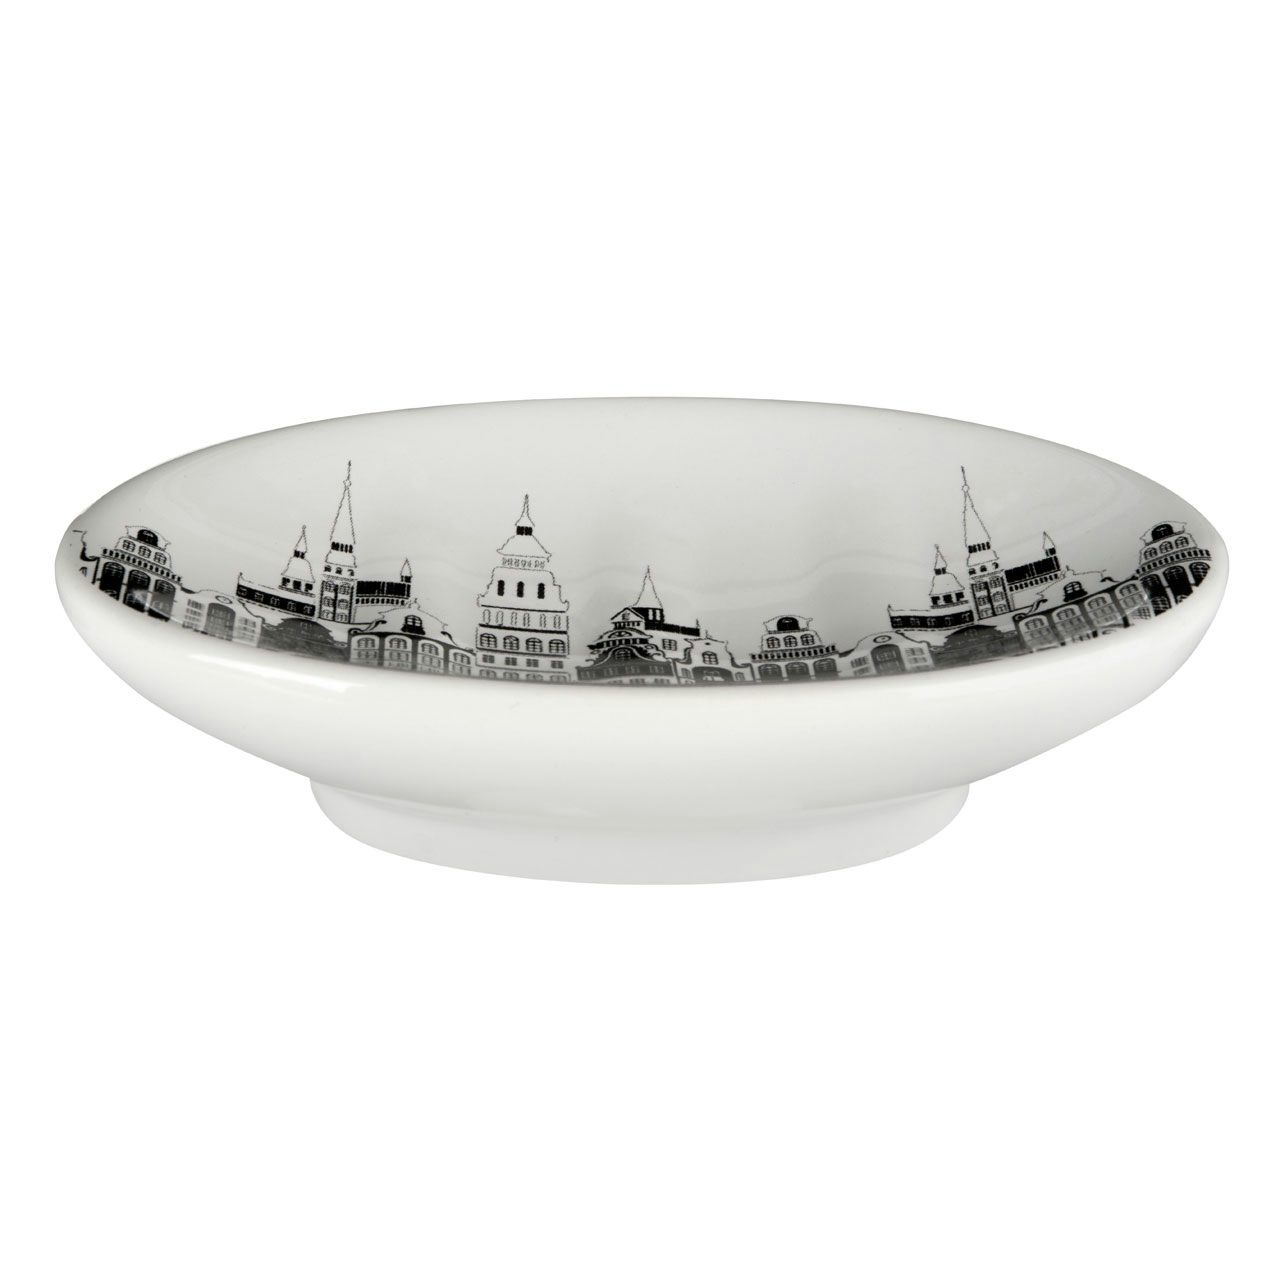 Accents Skyline dolomite white and black soap dish